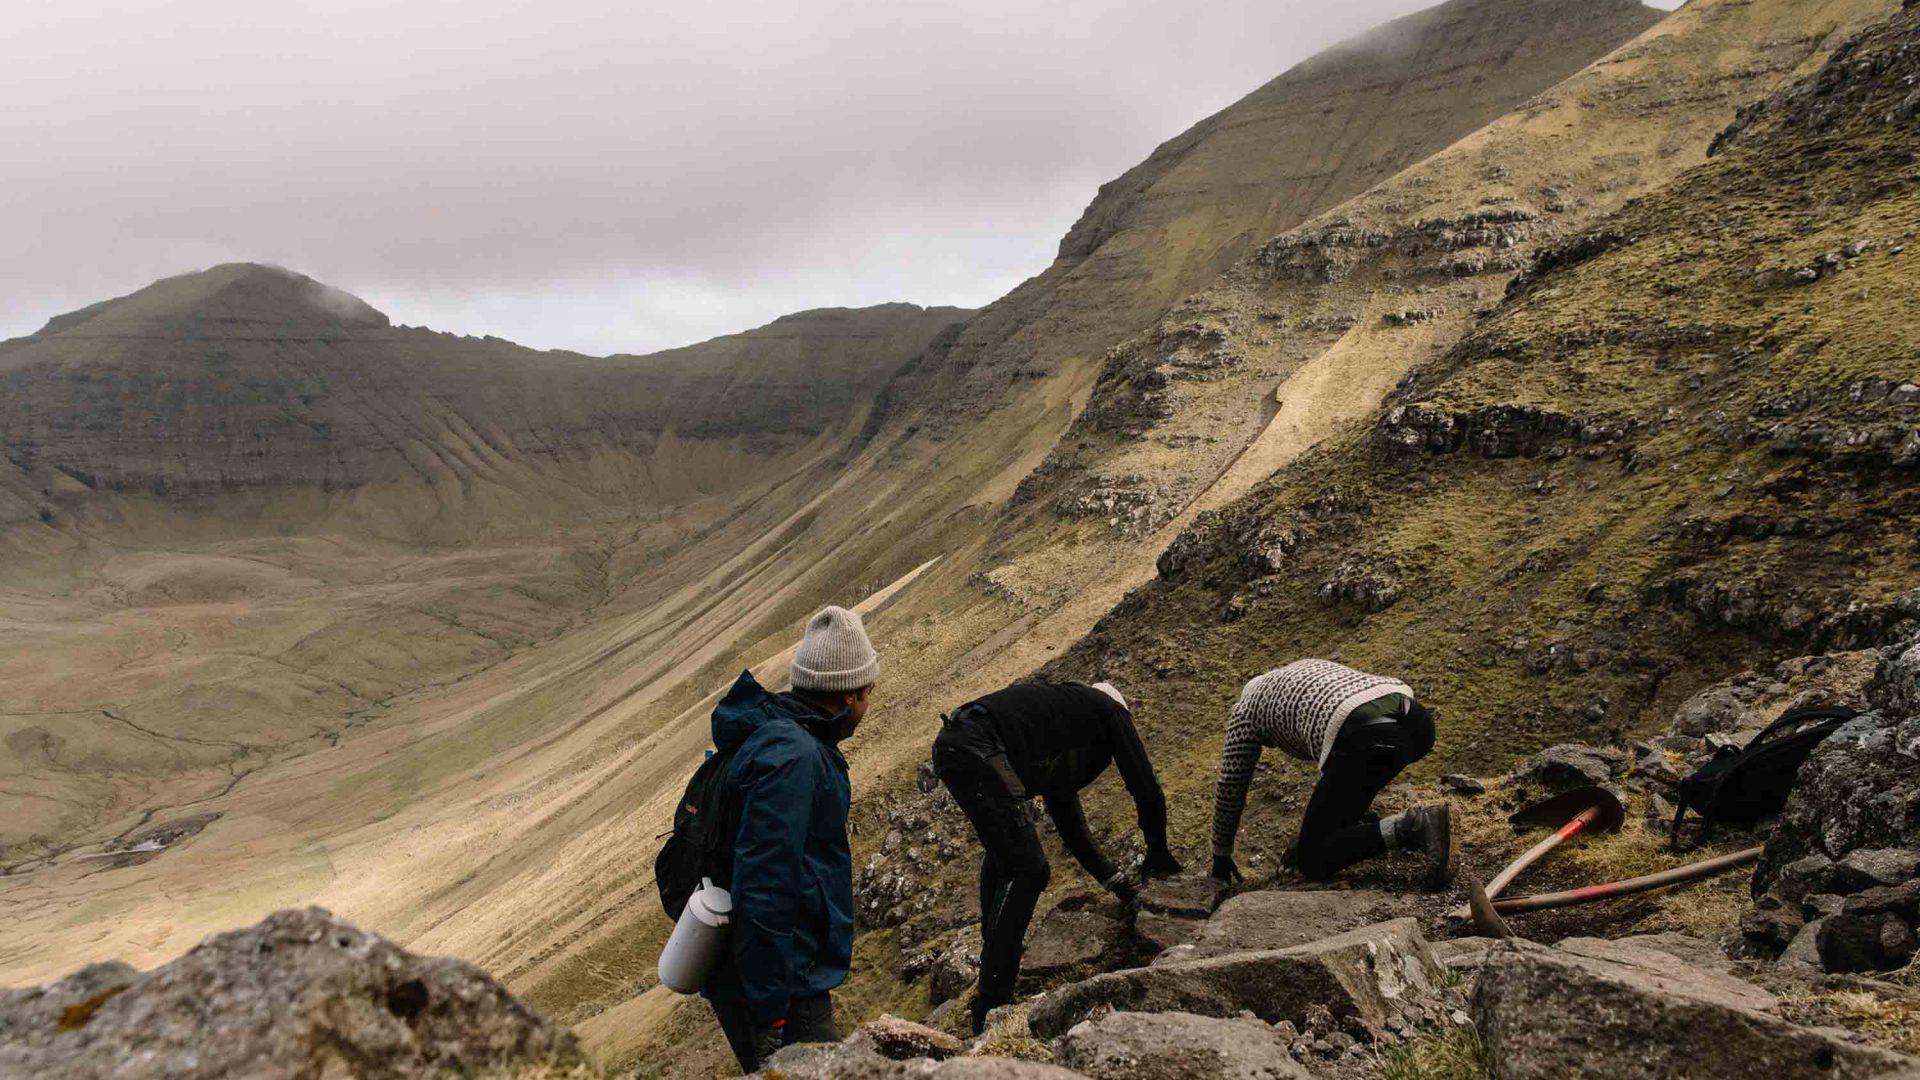 Three people are bent over working in the mountains.